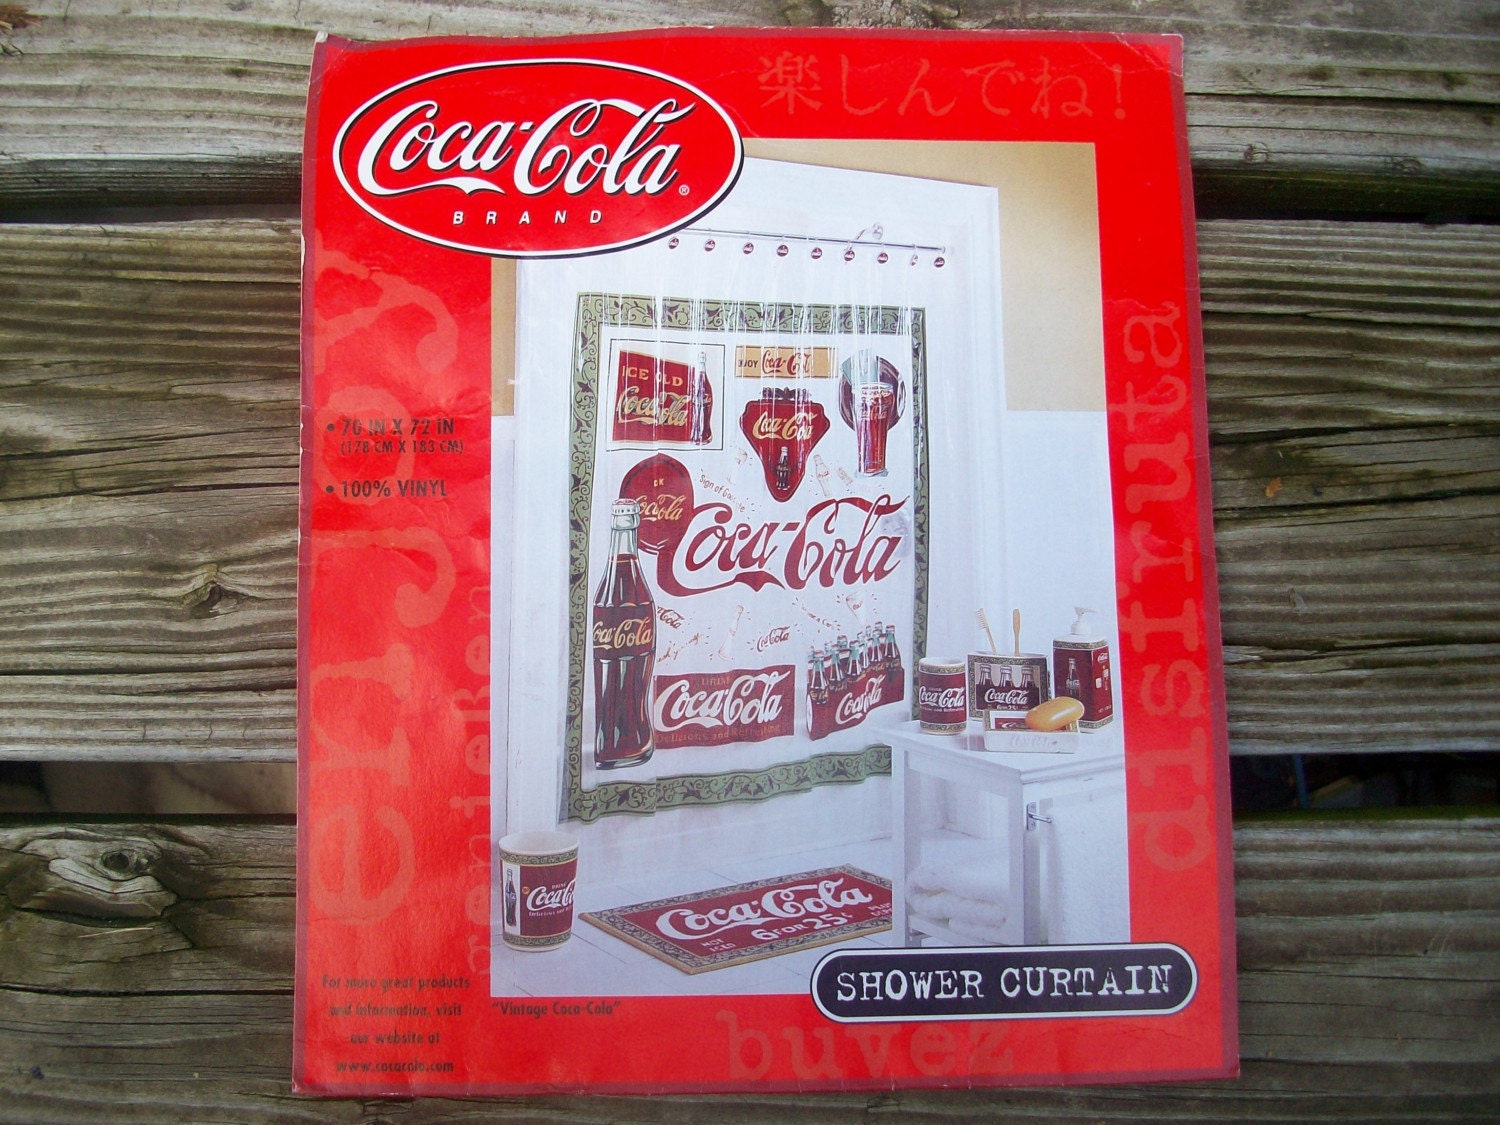 SHOPZILLA - COCA COLA COLLECTIBLES SHOPPING - GIFTS, FLOWERS